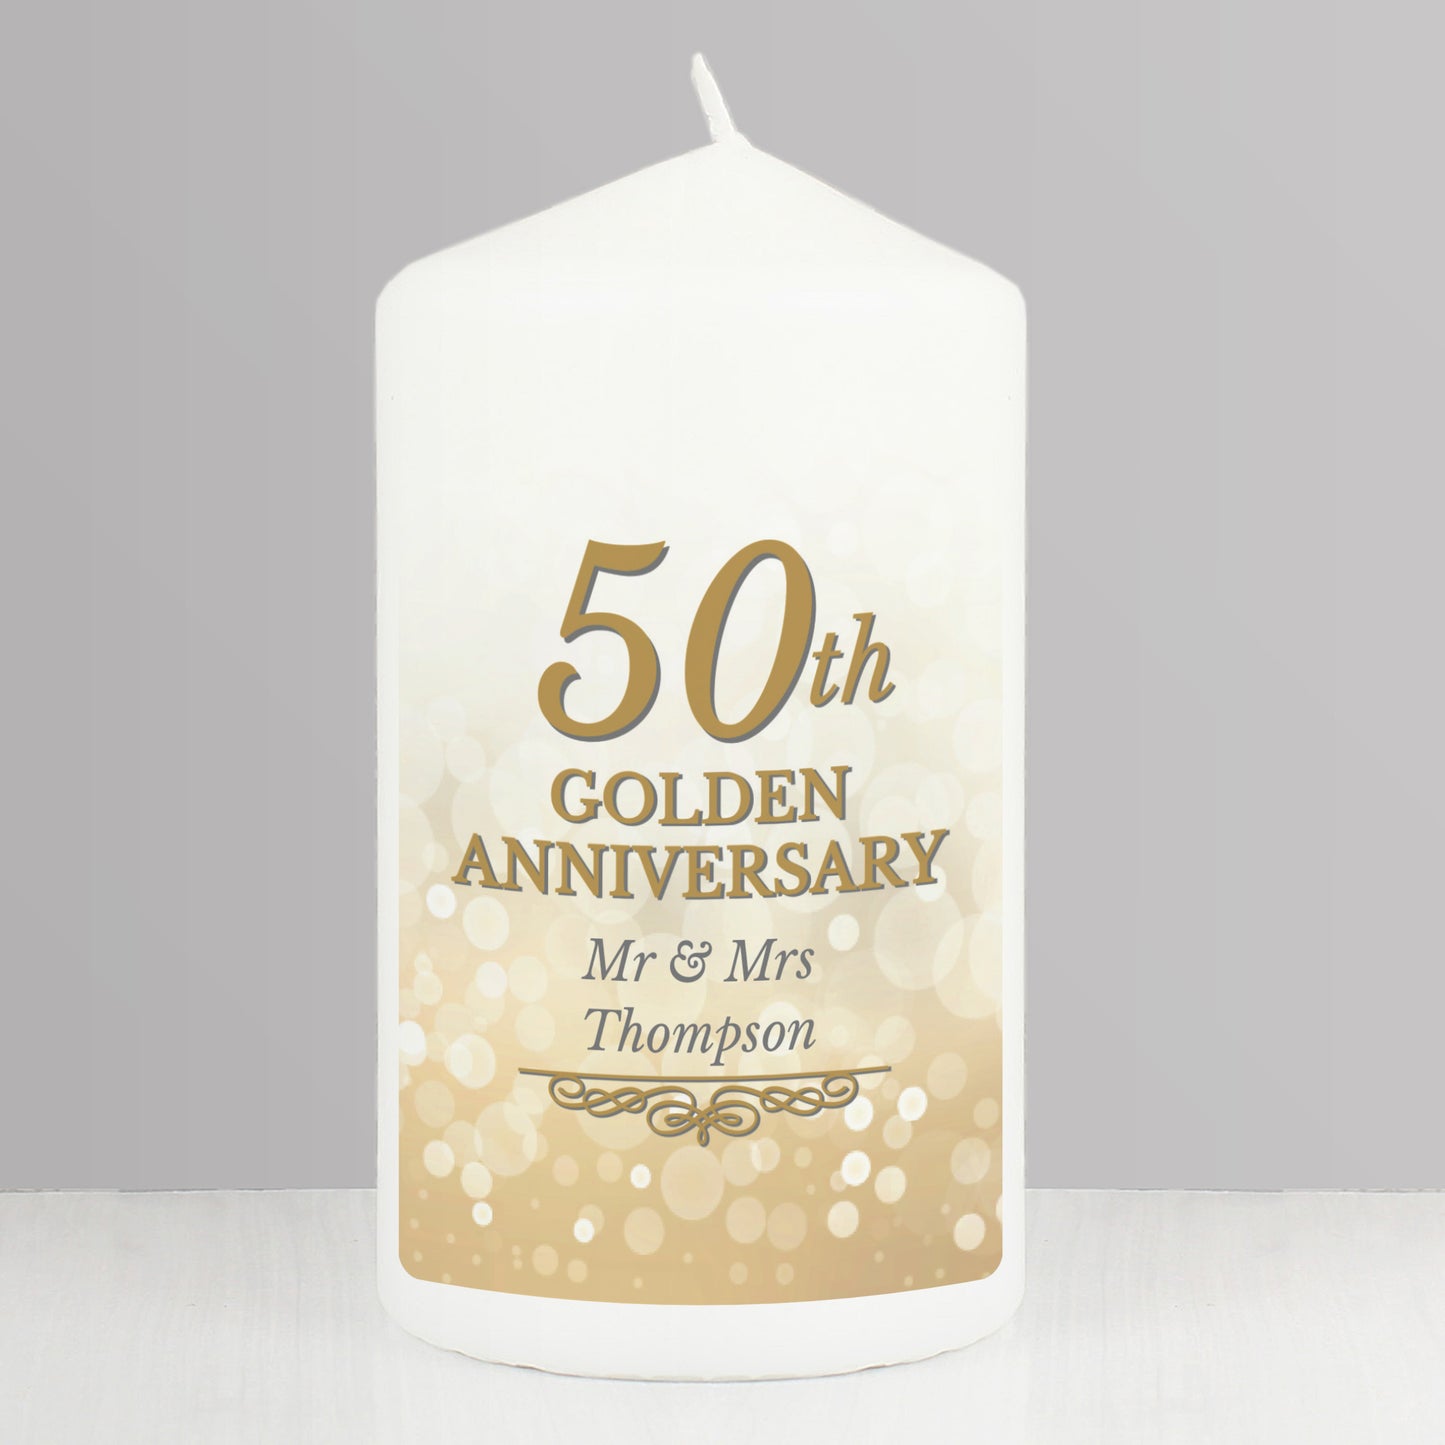 Personalised 50th Golden Anniversary Pillar Candle - Personalise It!